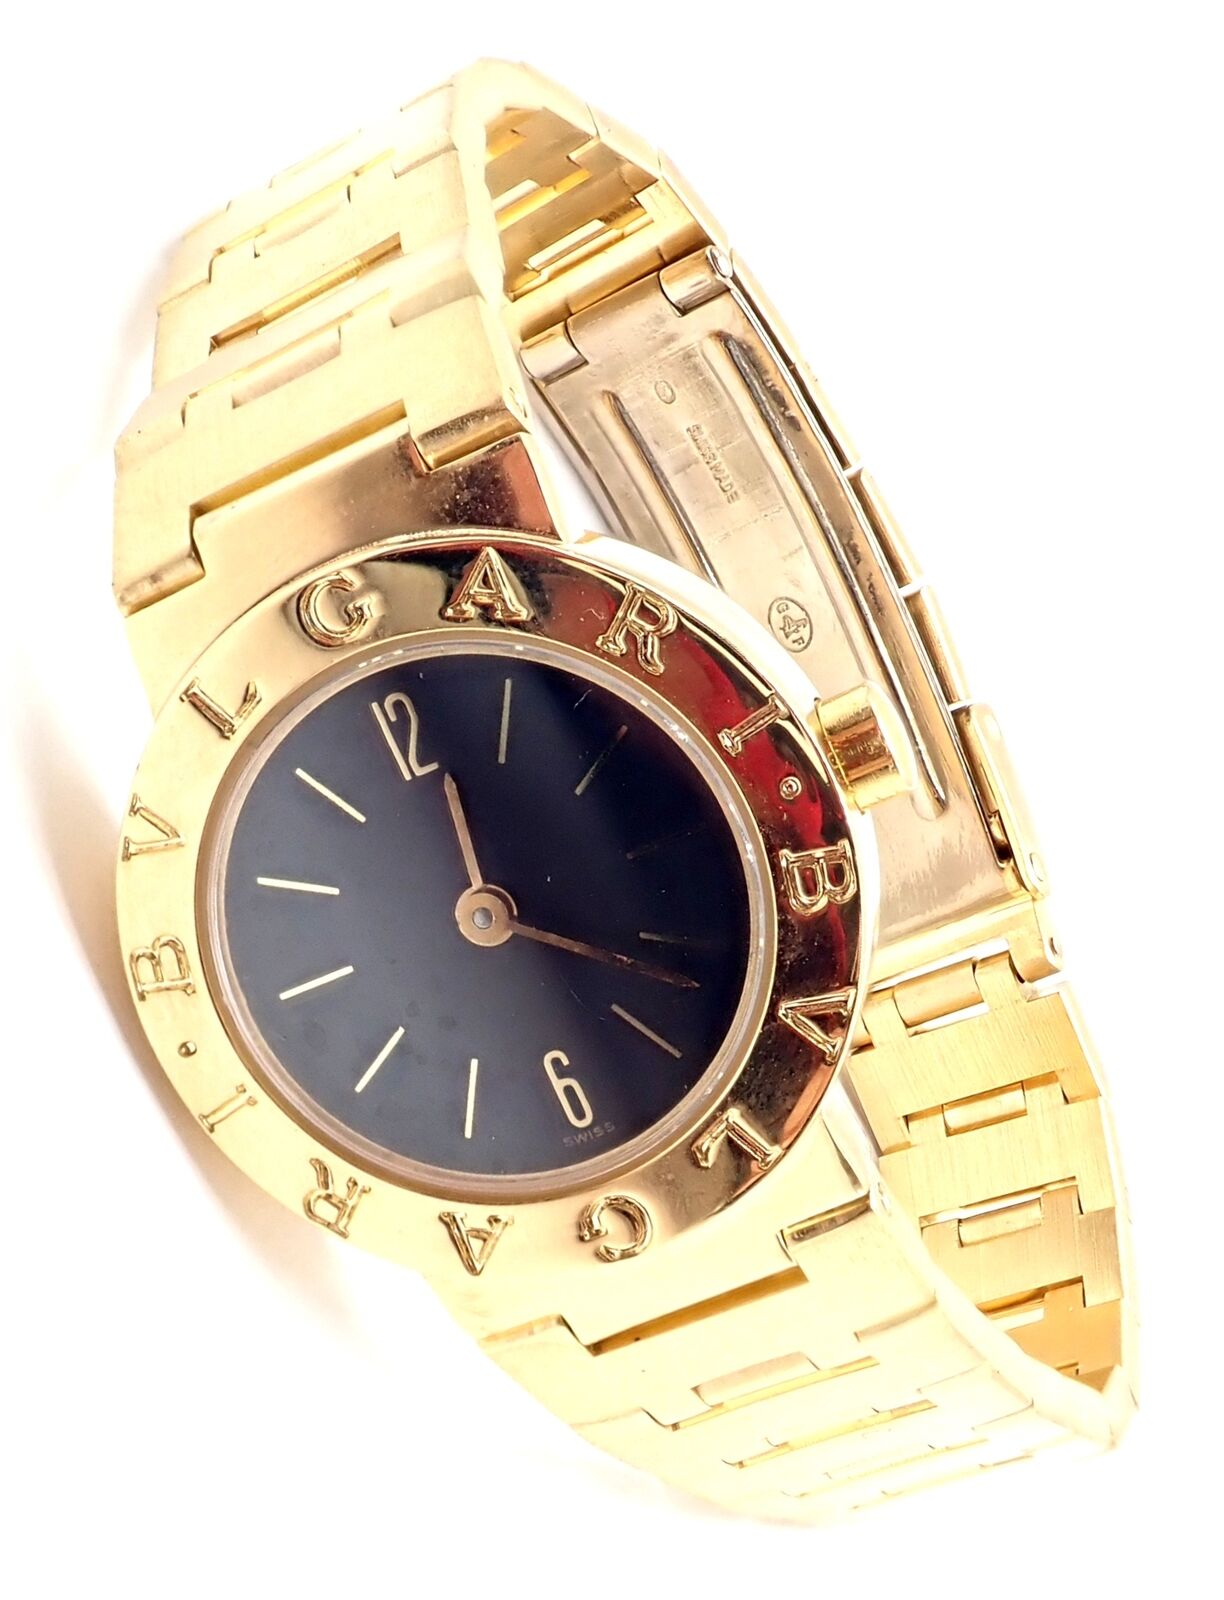 Bulgari Jewelry & Watches:Watches, Parts & Accessories:Watches:Wristwatches Authentic! Bulgari Bvlgari 18k Yellow Solid Gold Diagono Bracelet Watch BB23GG